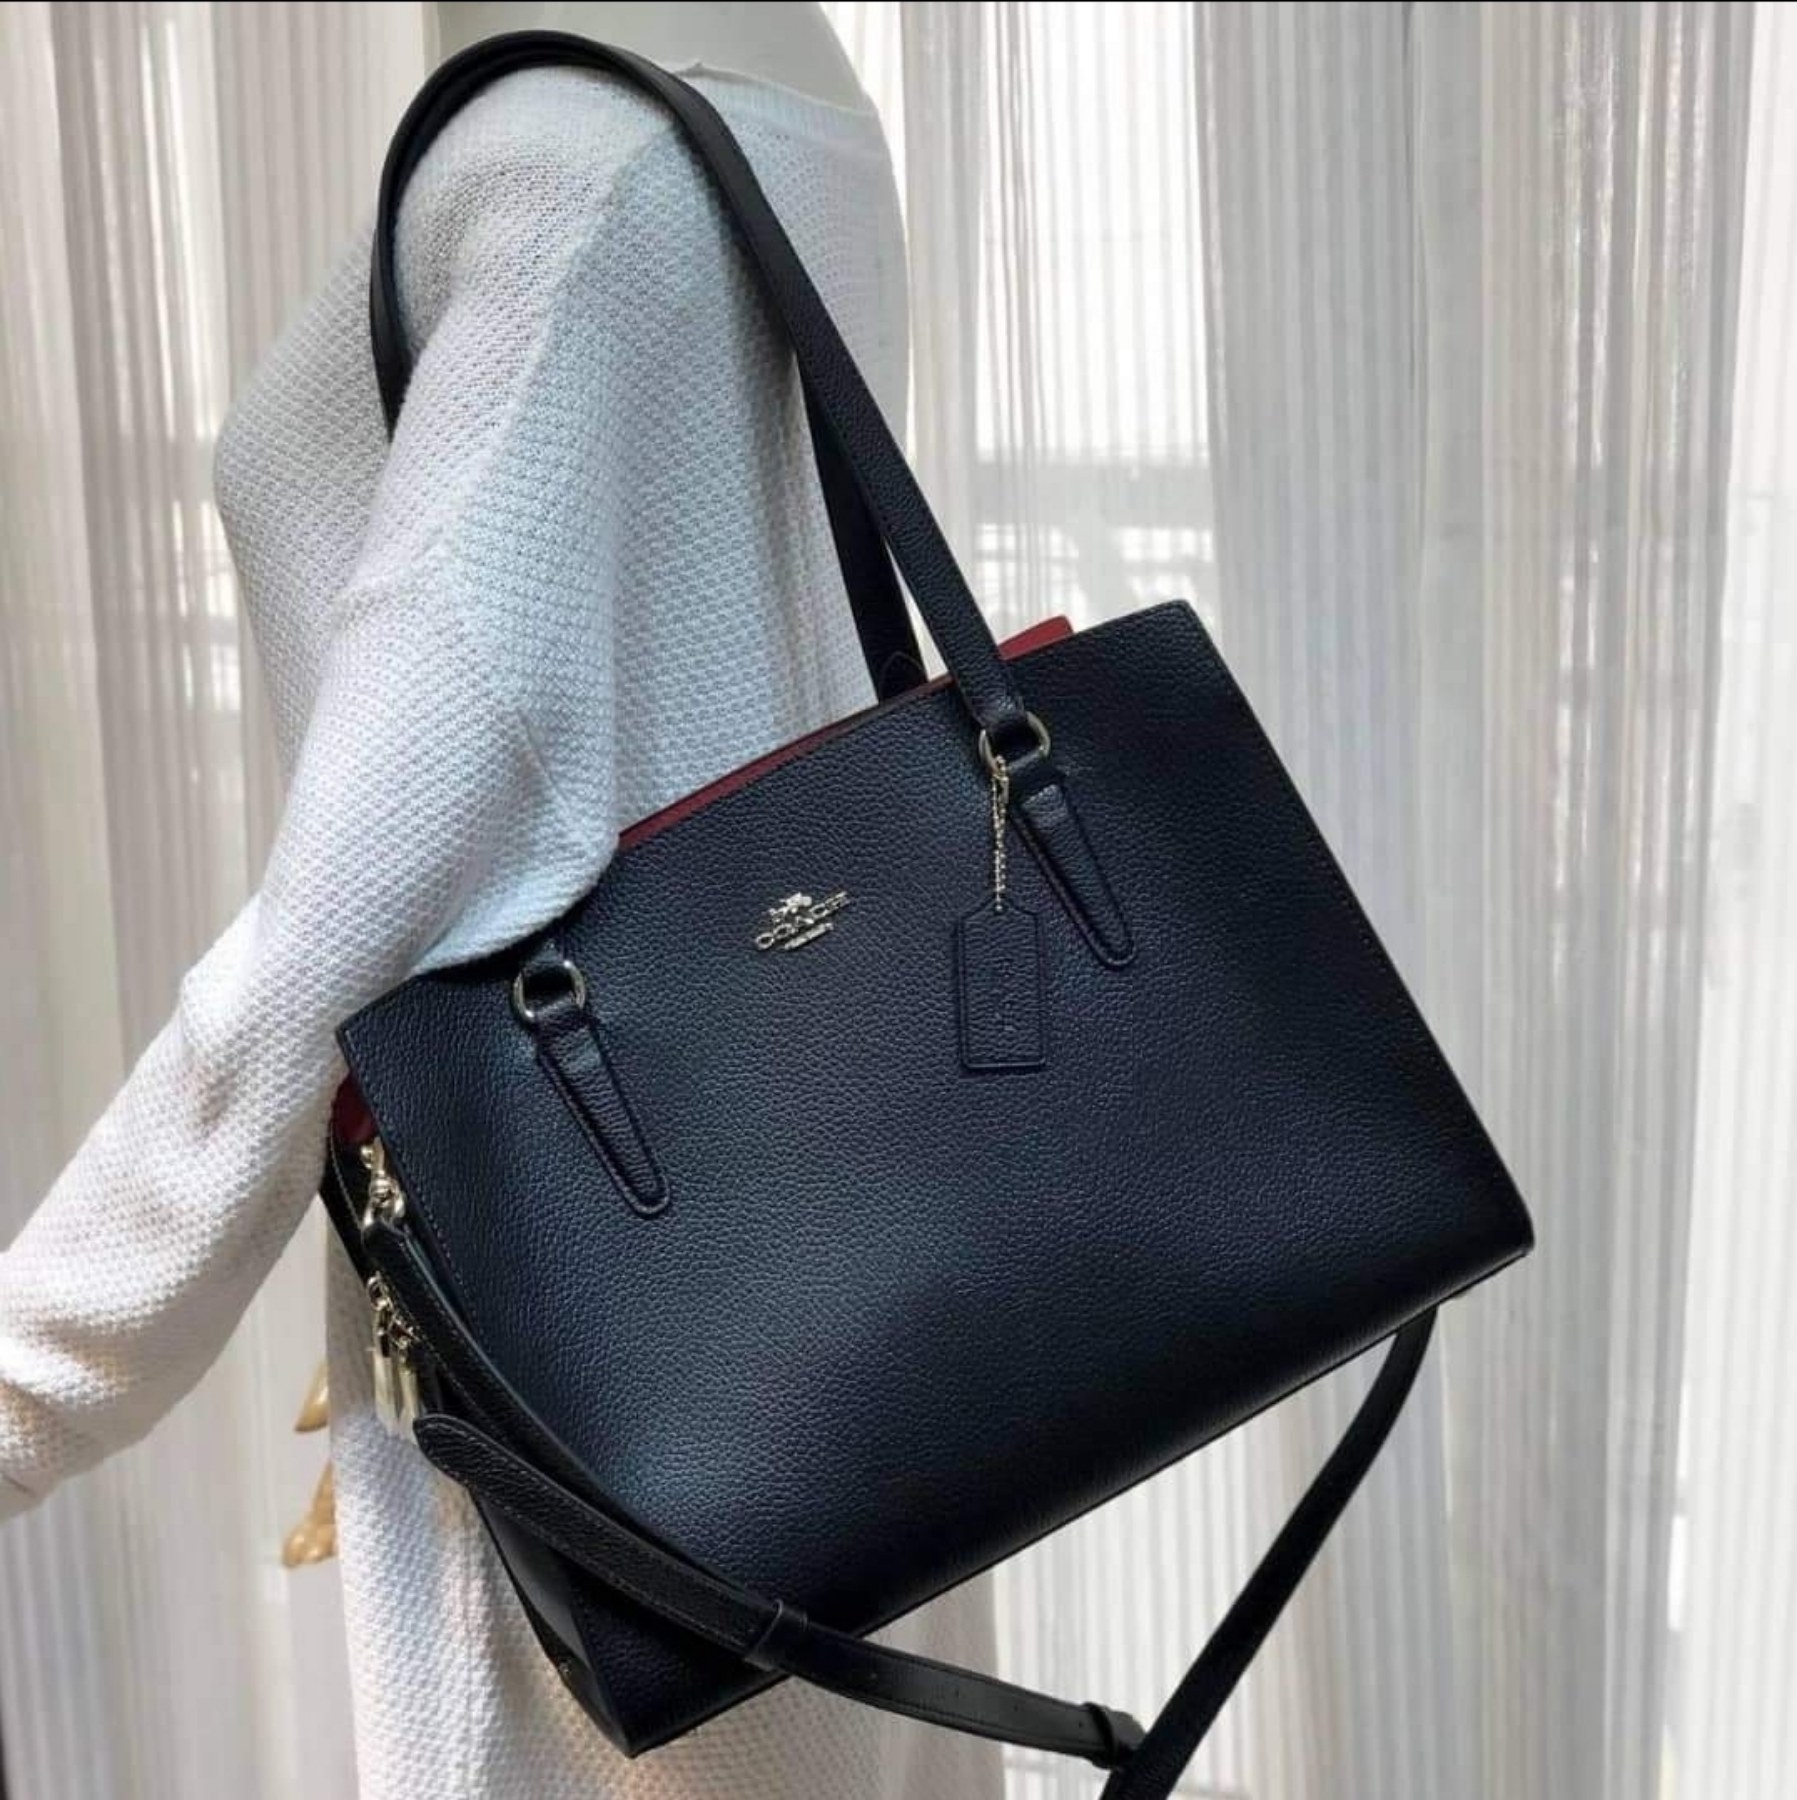 Coach C4078 Tatum Carryall Bag in Black / True Red Double Face Crossgrain  Leather - Women's Tote Bag with Detachable Strap | Lazada PH